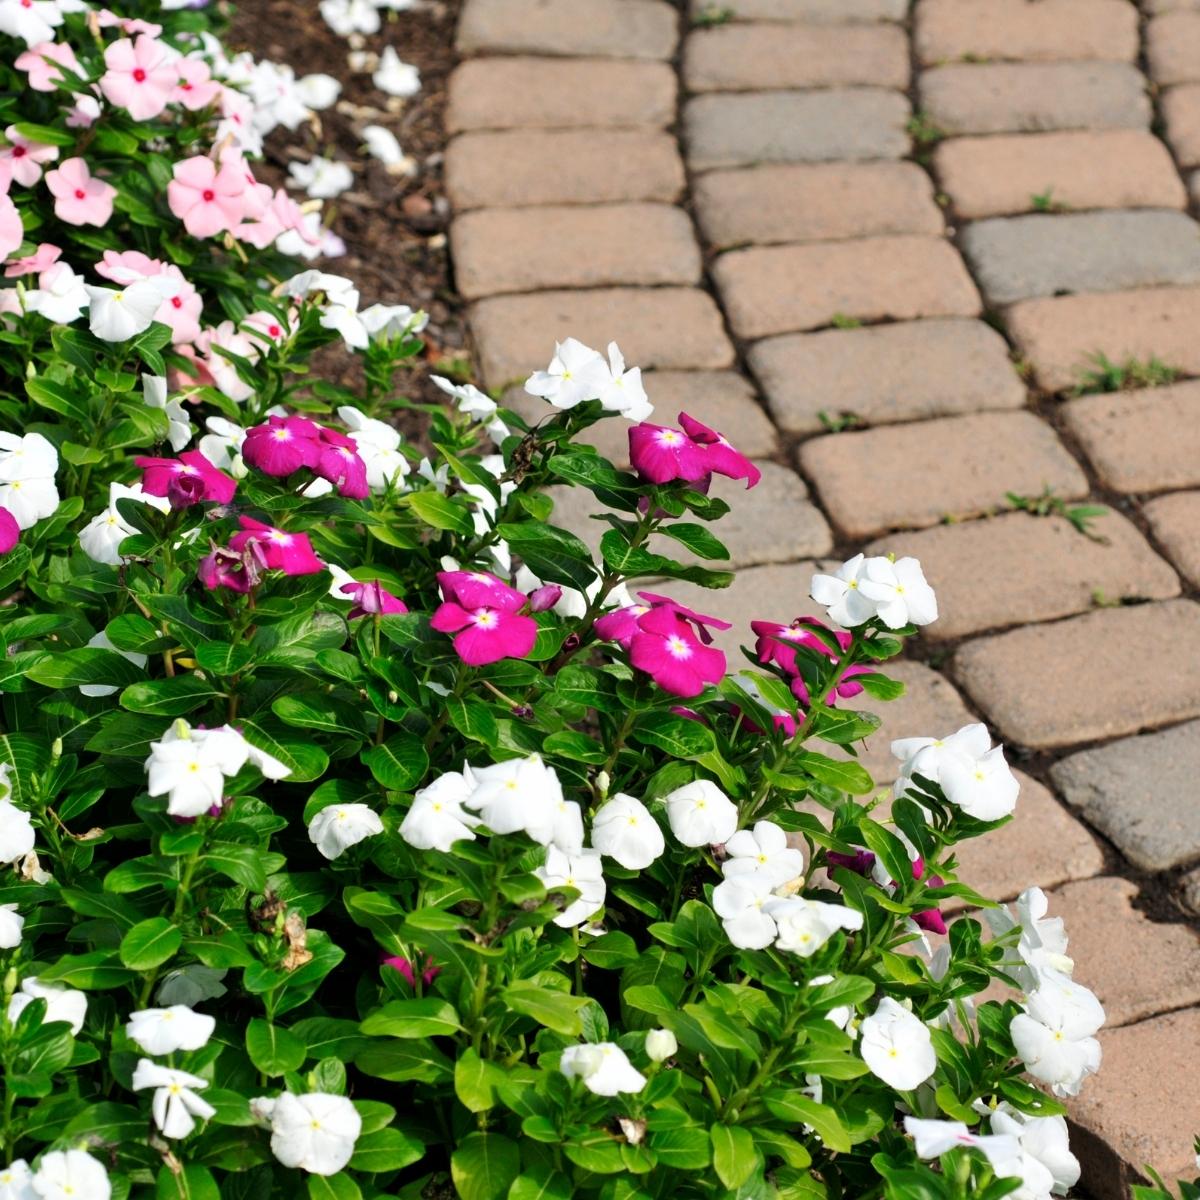 pink and white impatiens along a brick pathway